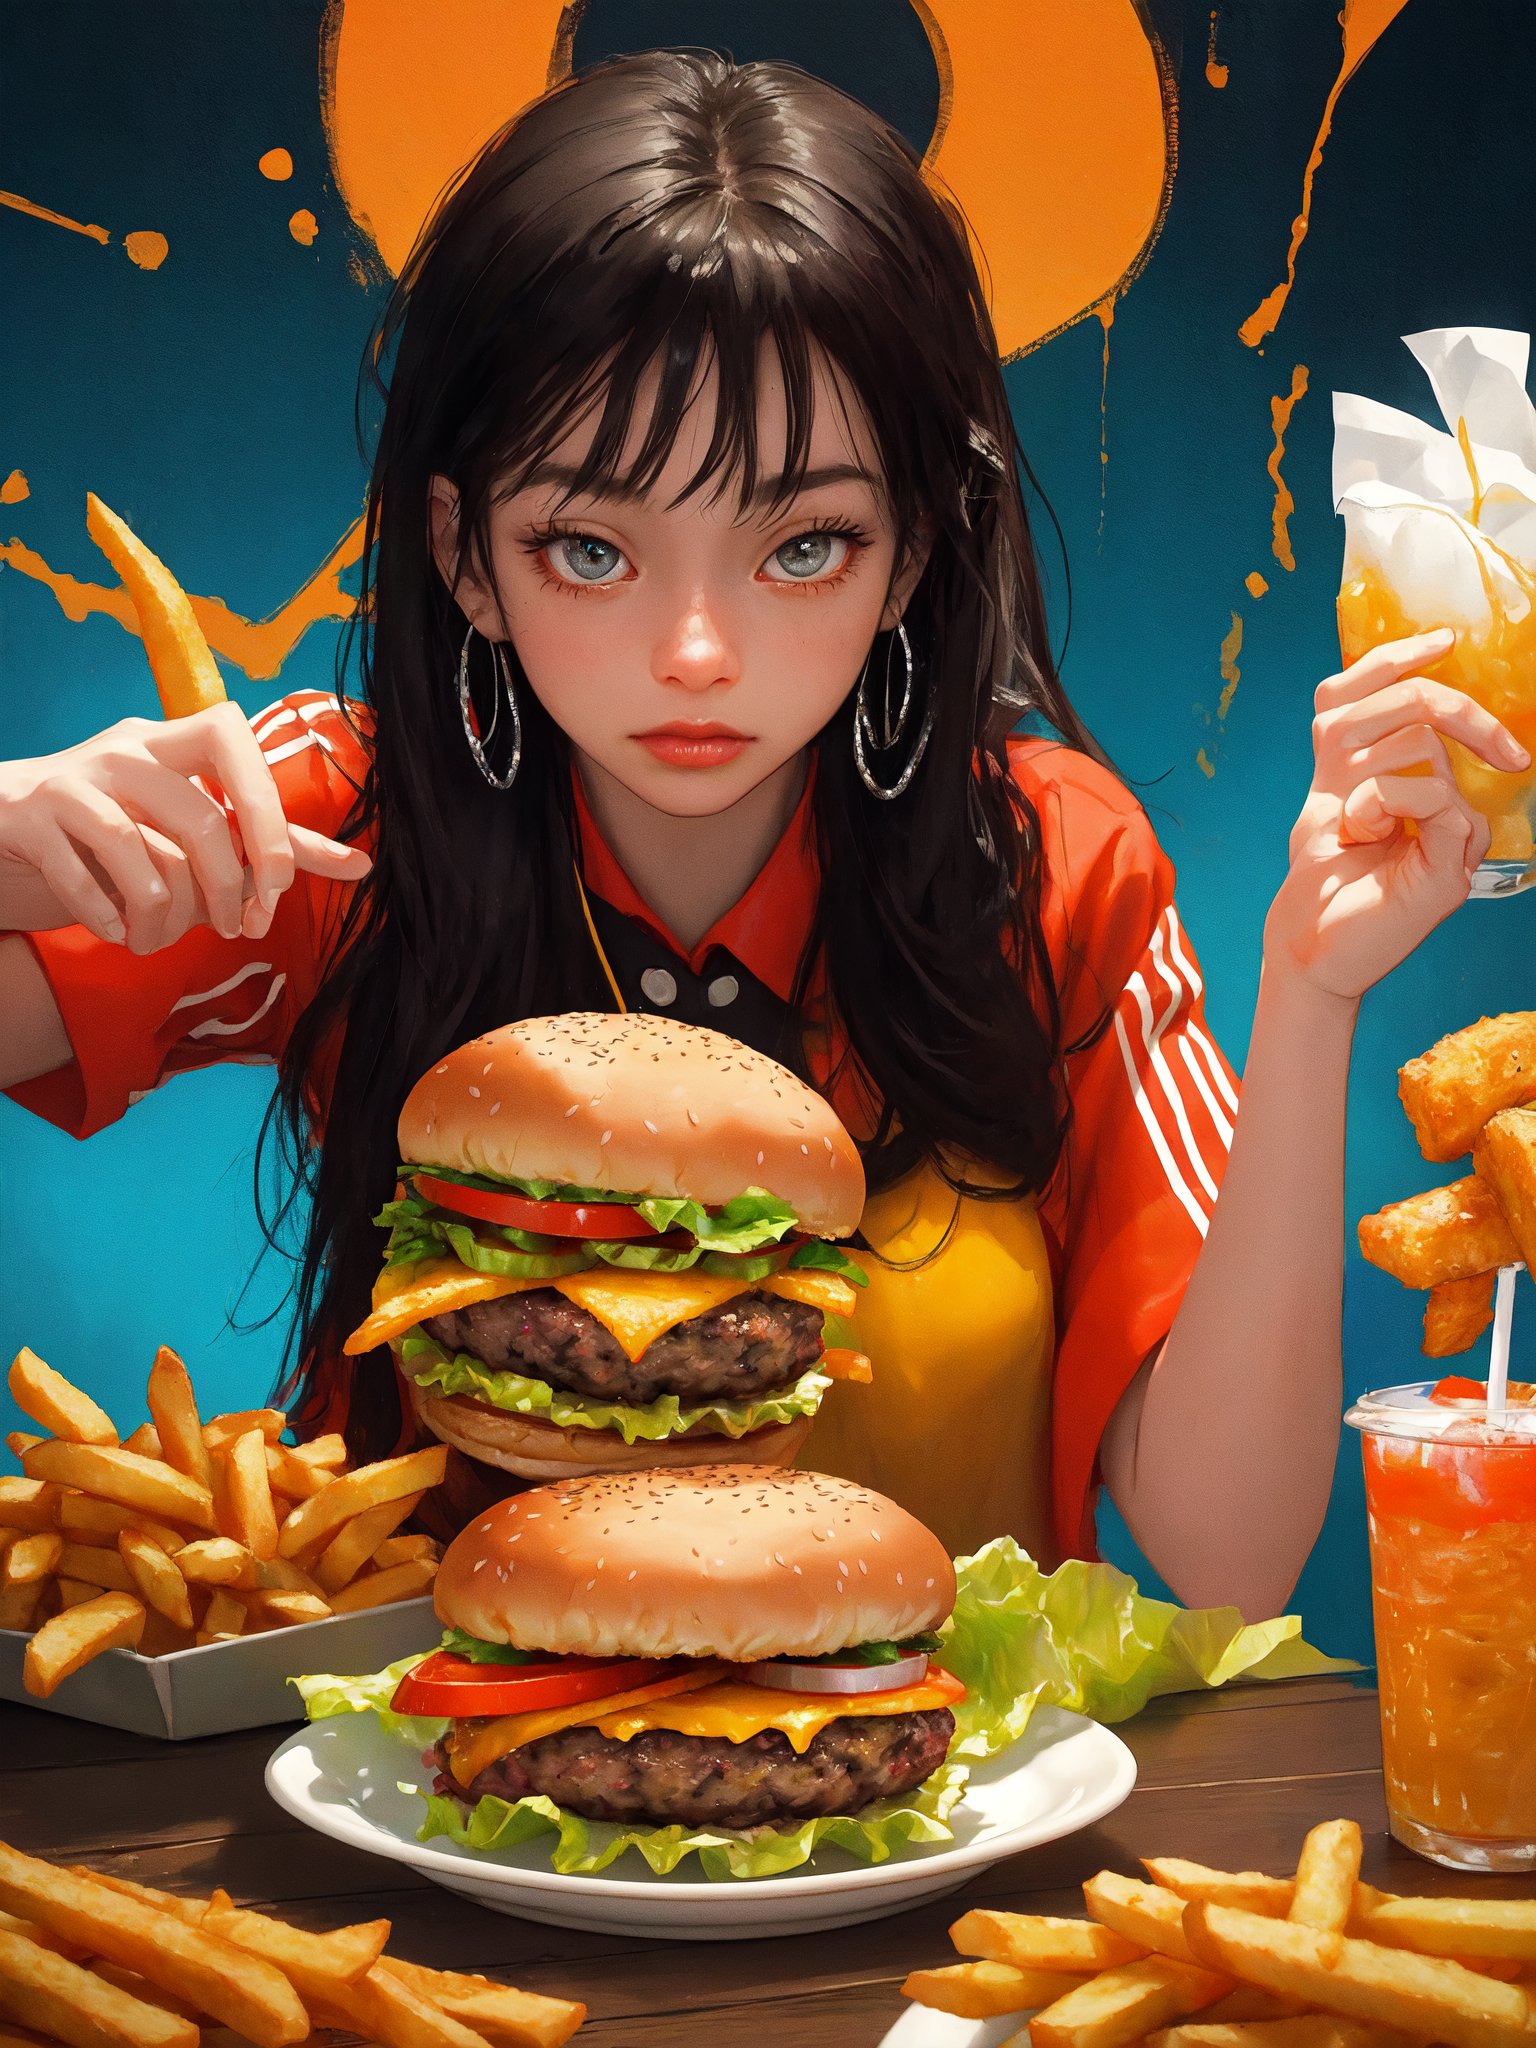   burger with fries and drink close up view ,
 
 
 dynamic colors, highly vibrant saturated colors, UHD, QDOT, OLED quality, dynamic contrast, rec2020


 

, thin cracks in paint,
 perfect split lighting,oil painting
